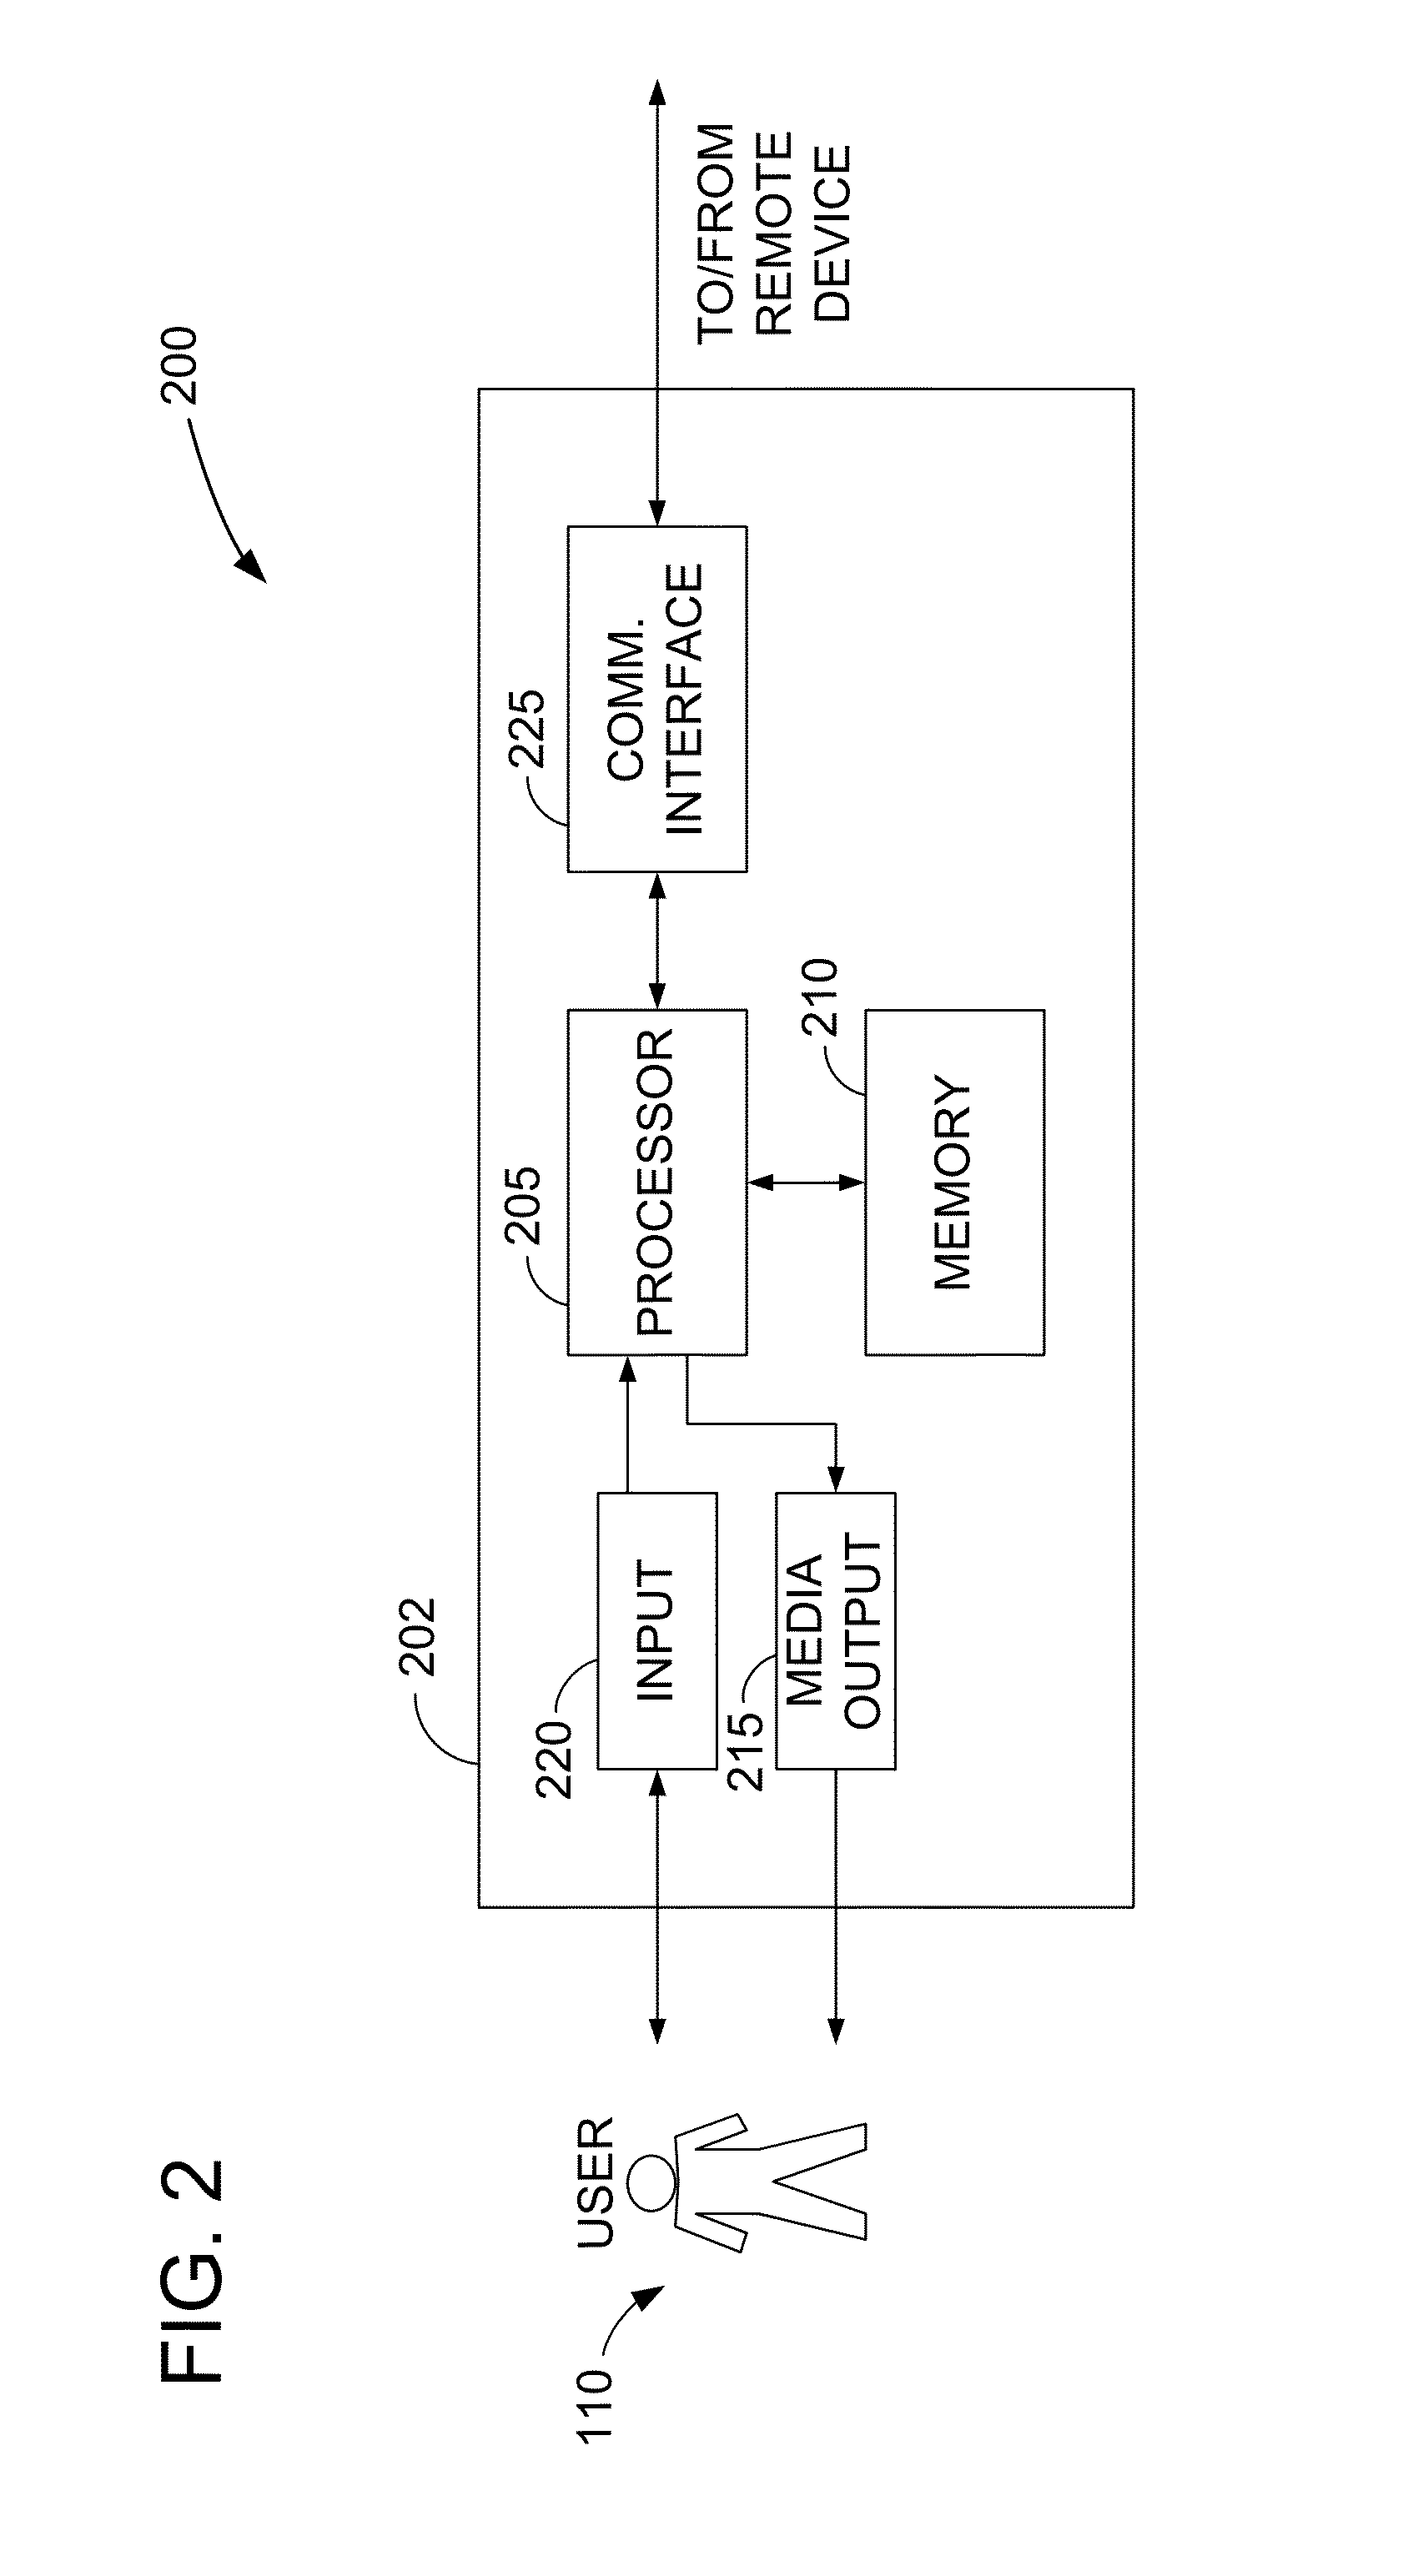 Methods and systems for managing crop harvesting activities